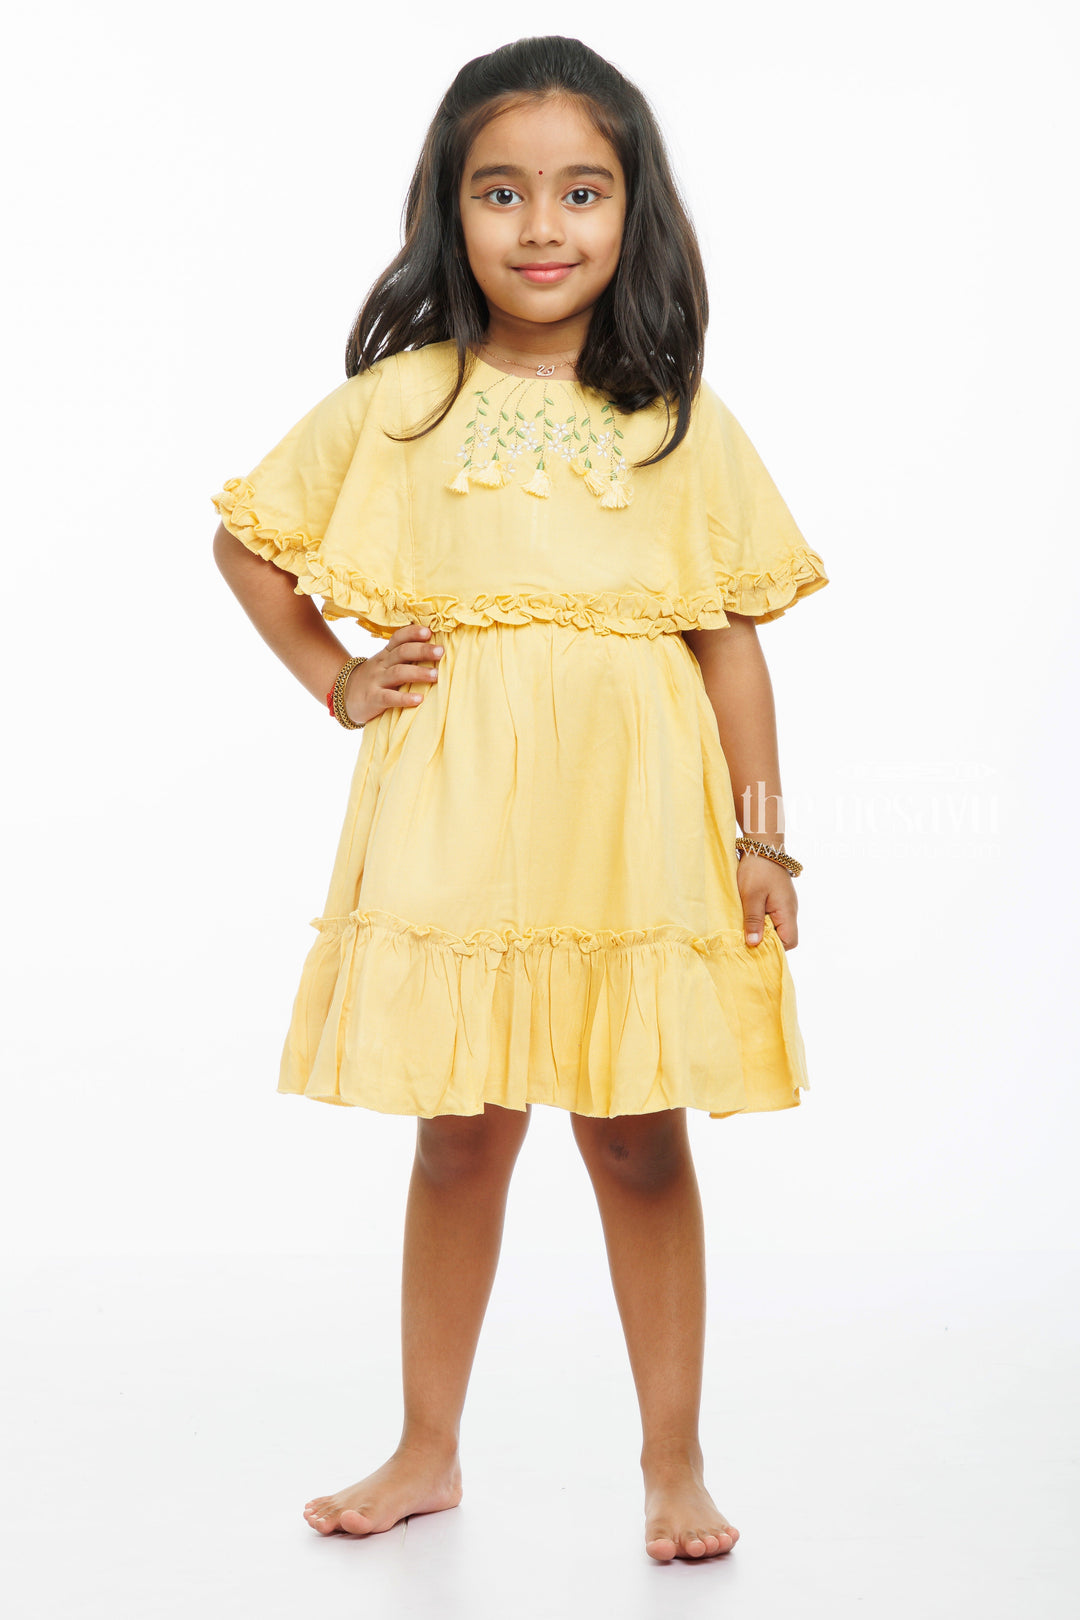 The Nesavu Girls Cotton Frock Sunshine Embrace: Chic Embroidered Knee-Length Frock for Sprightly Girls Nesavu 18 (2Y) / Yellow / Cotton GFC1301A-18 Find the Perfect Embroidered Summer Frock for Girls | Shop the Latest | The Nesavu